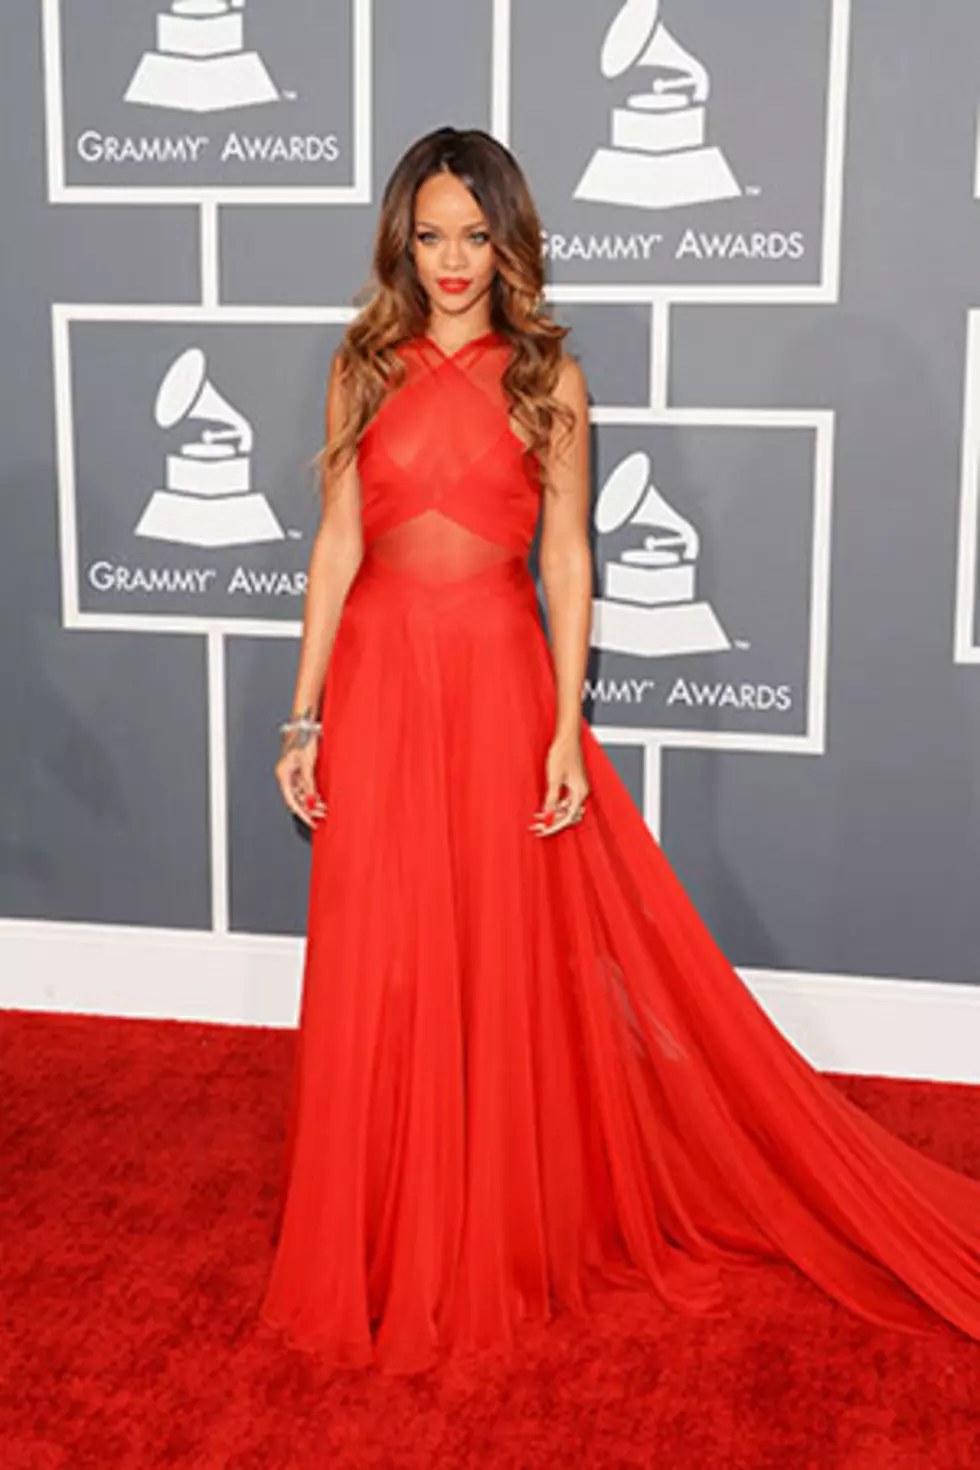 Lady in Red – Rihanna’s Style Evolution